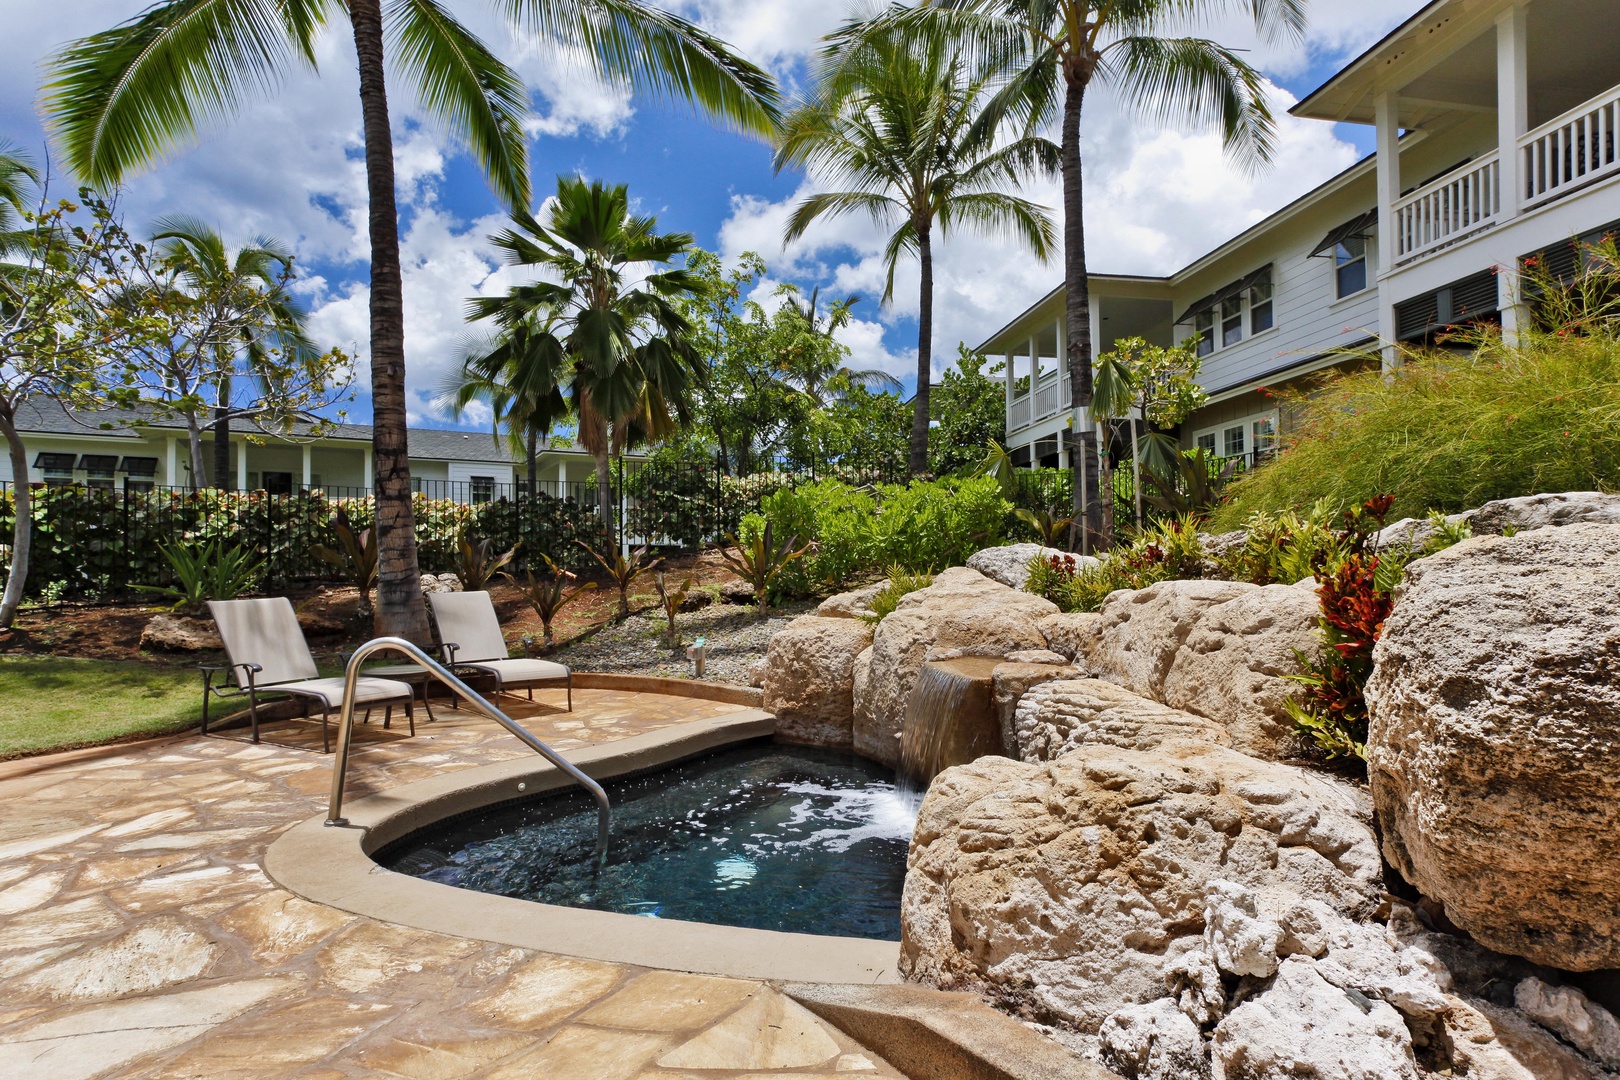 Kapolei Vacation Rentals, Coconut Plantation 1158-1 - Soak in the hot tub in the center of the palm fringed landscape.